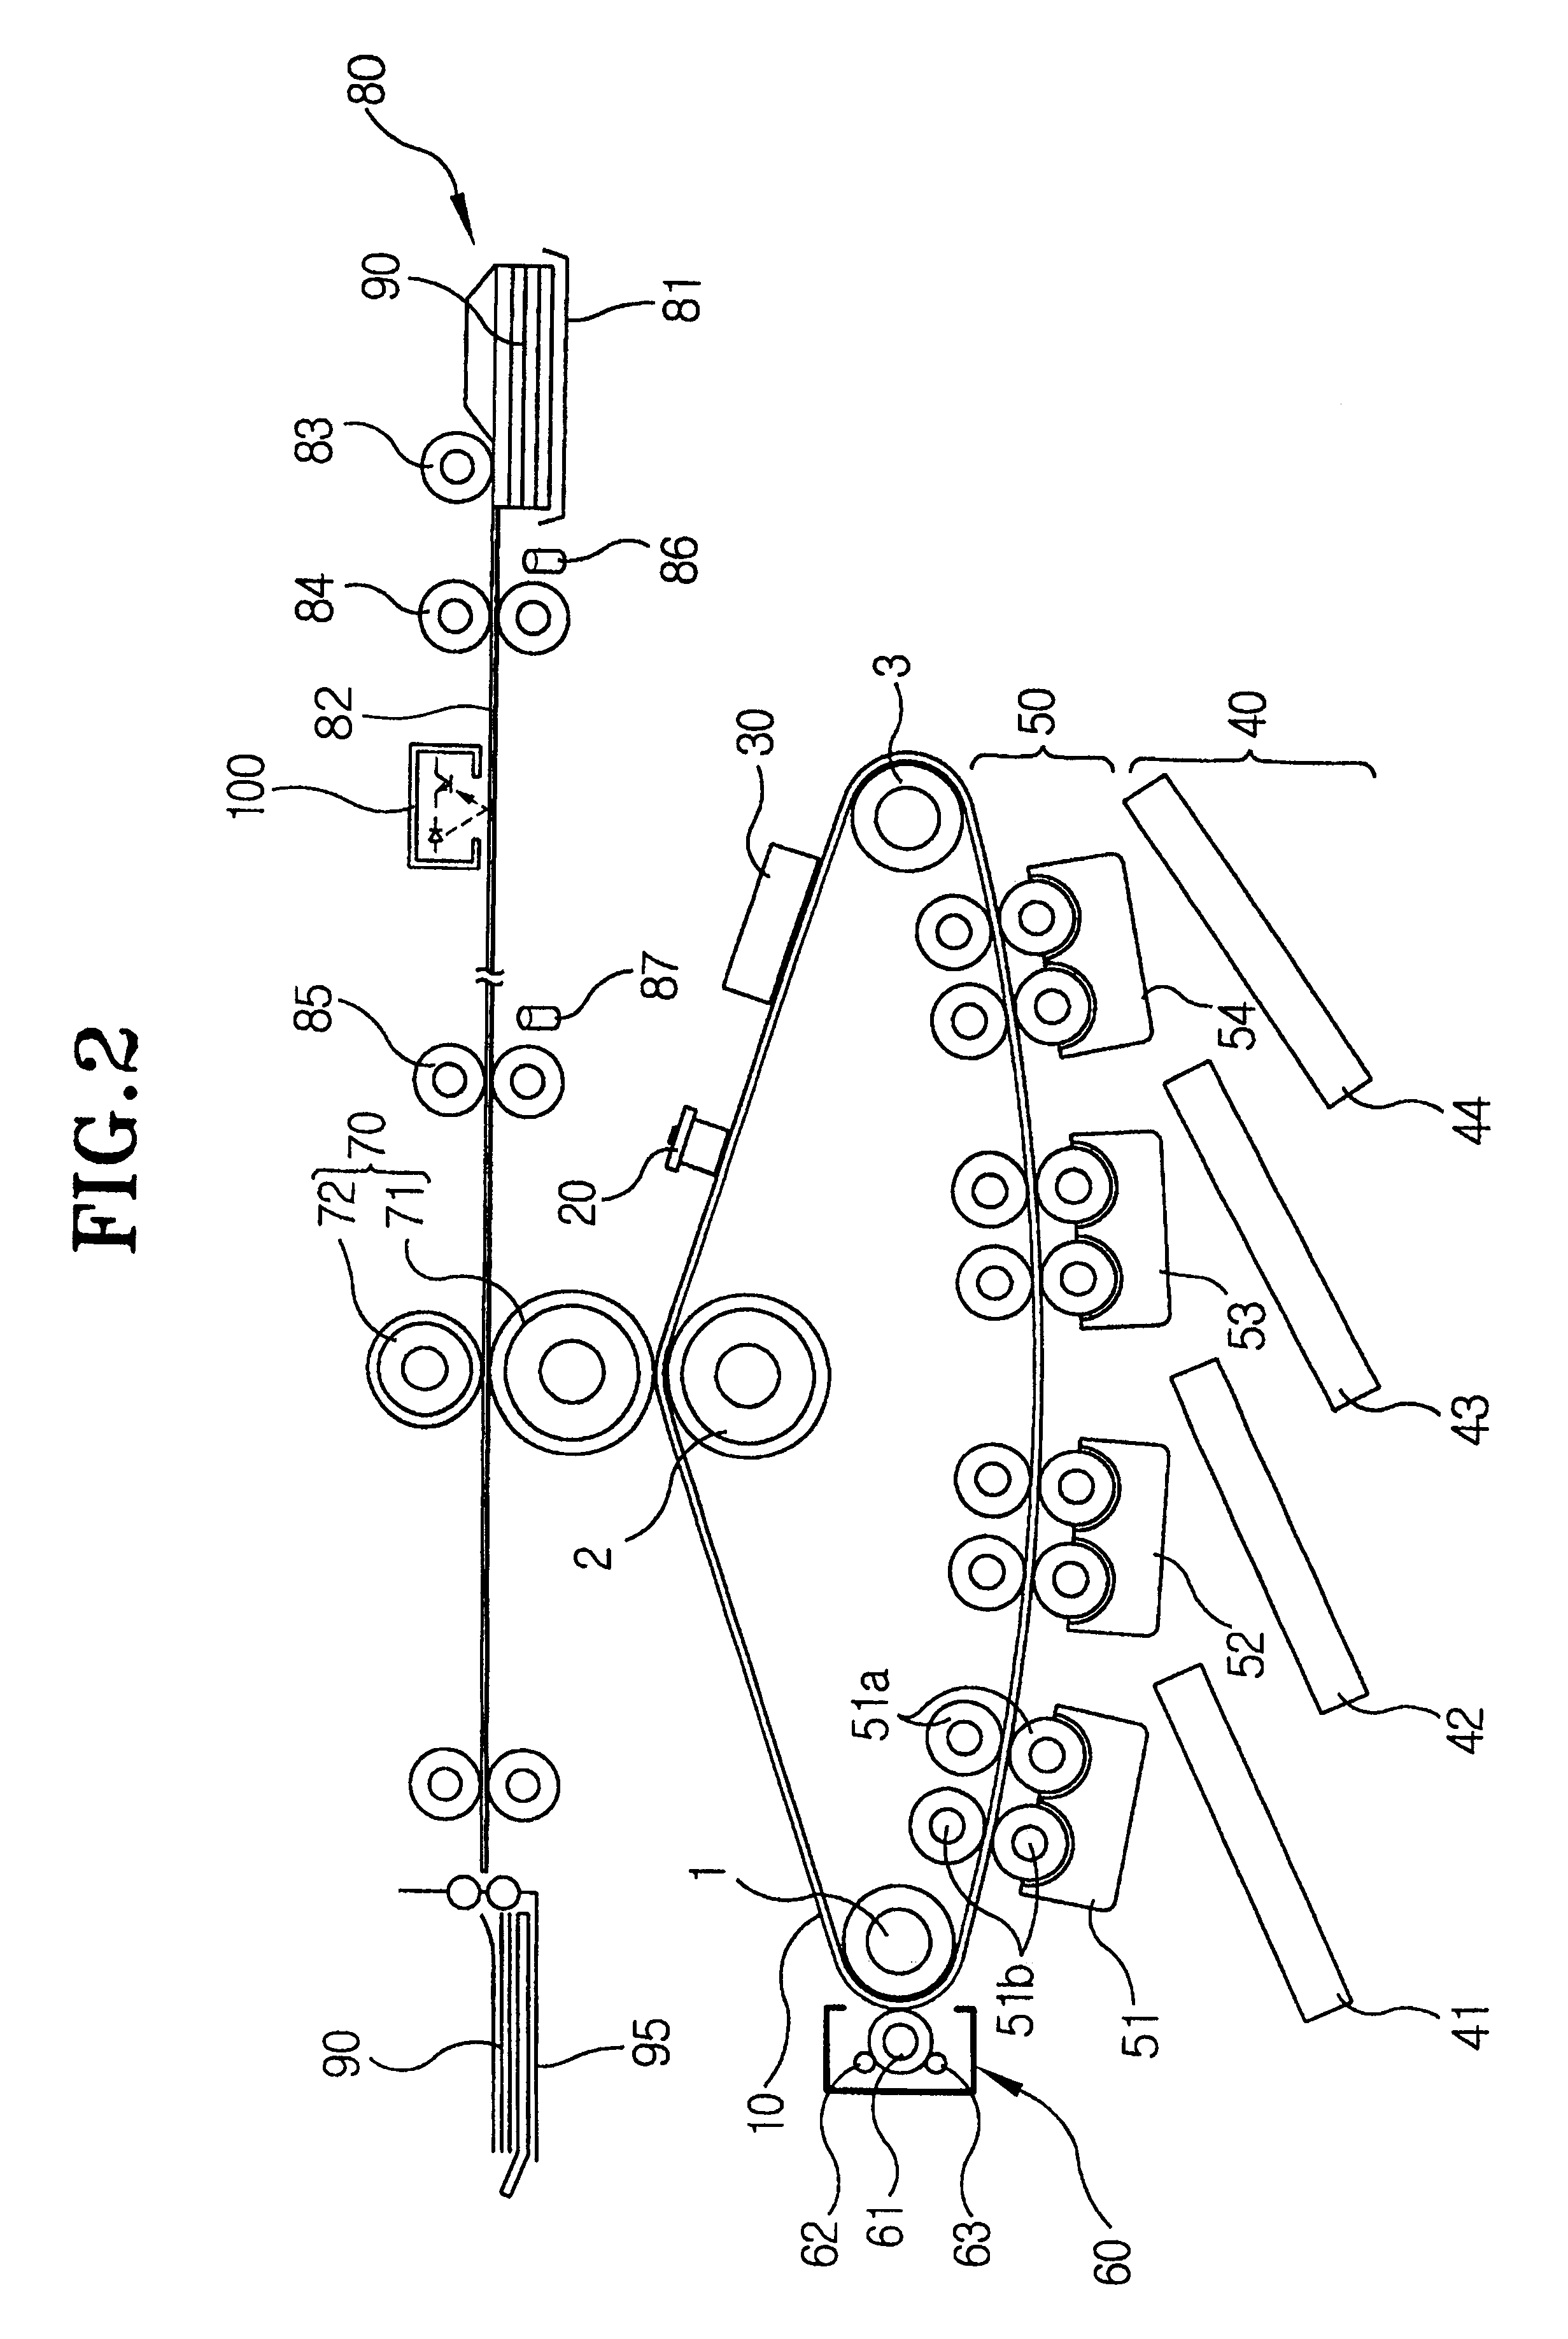 Image printing apparatus and a control method thereof